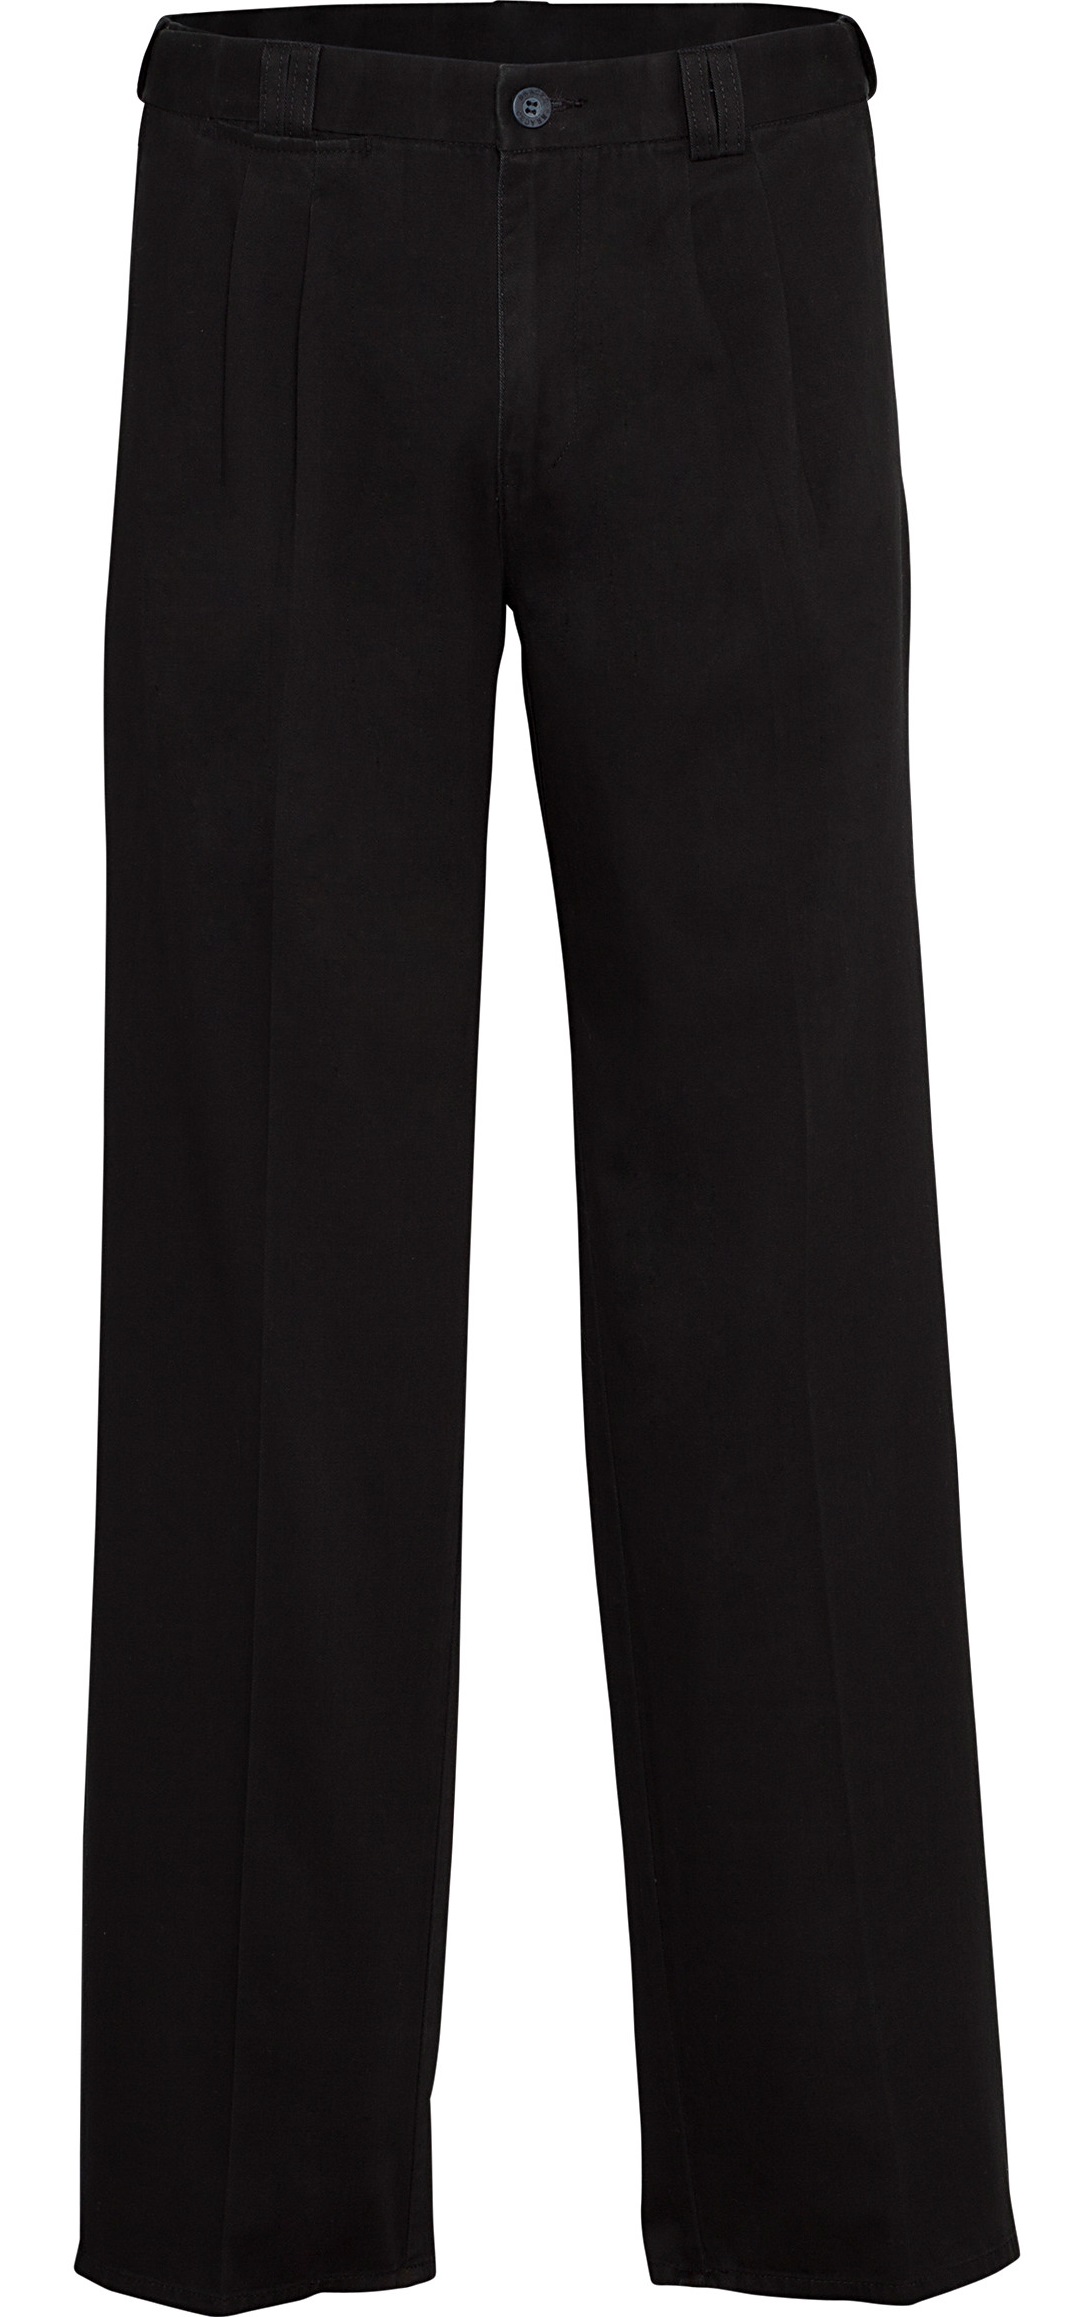 Chino Pants Online by Bracks Ezi Fit Mens Chinos | Save up to 25%